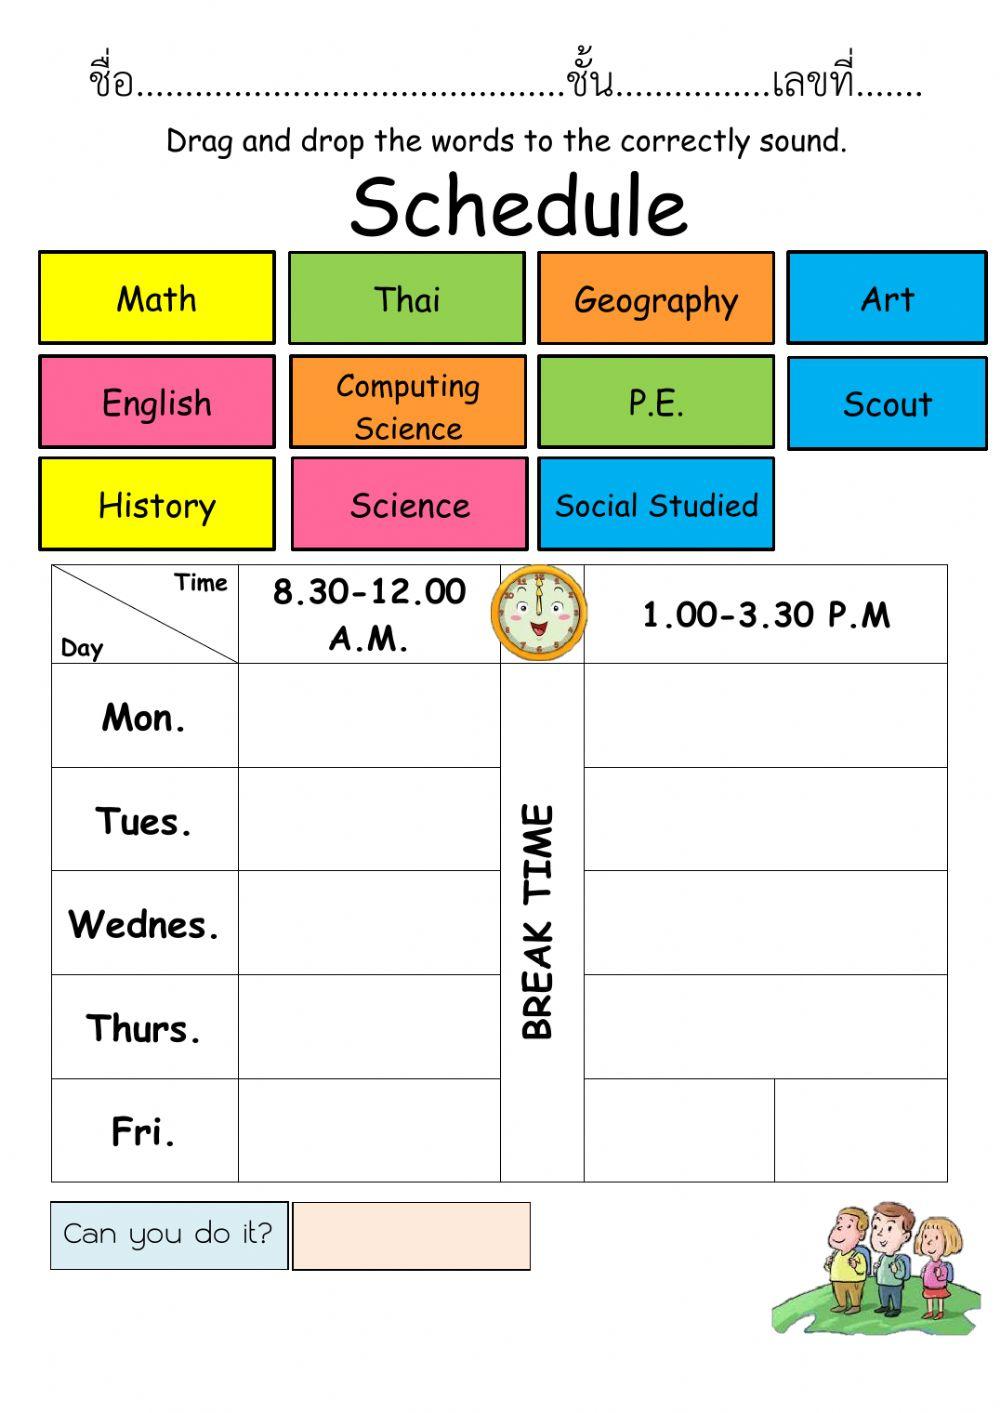 My learning schedule